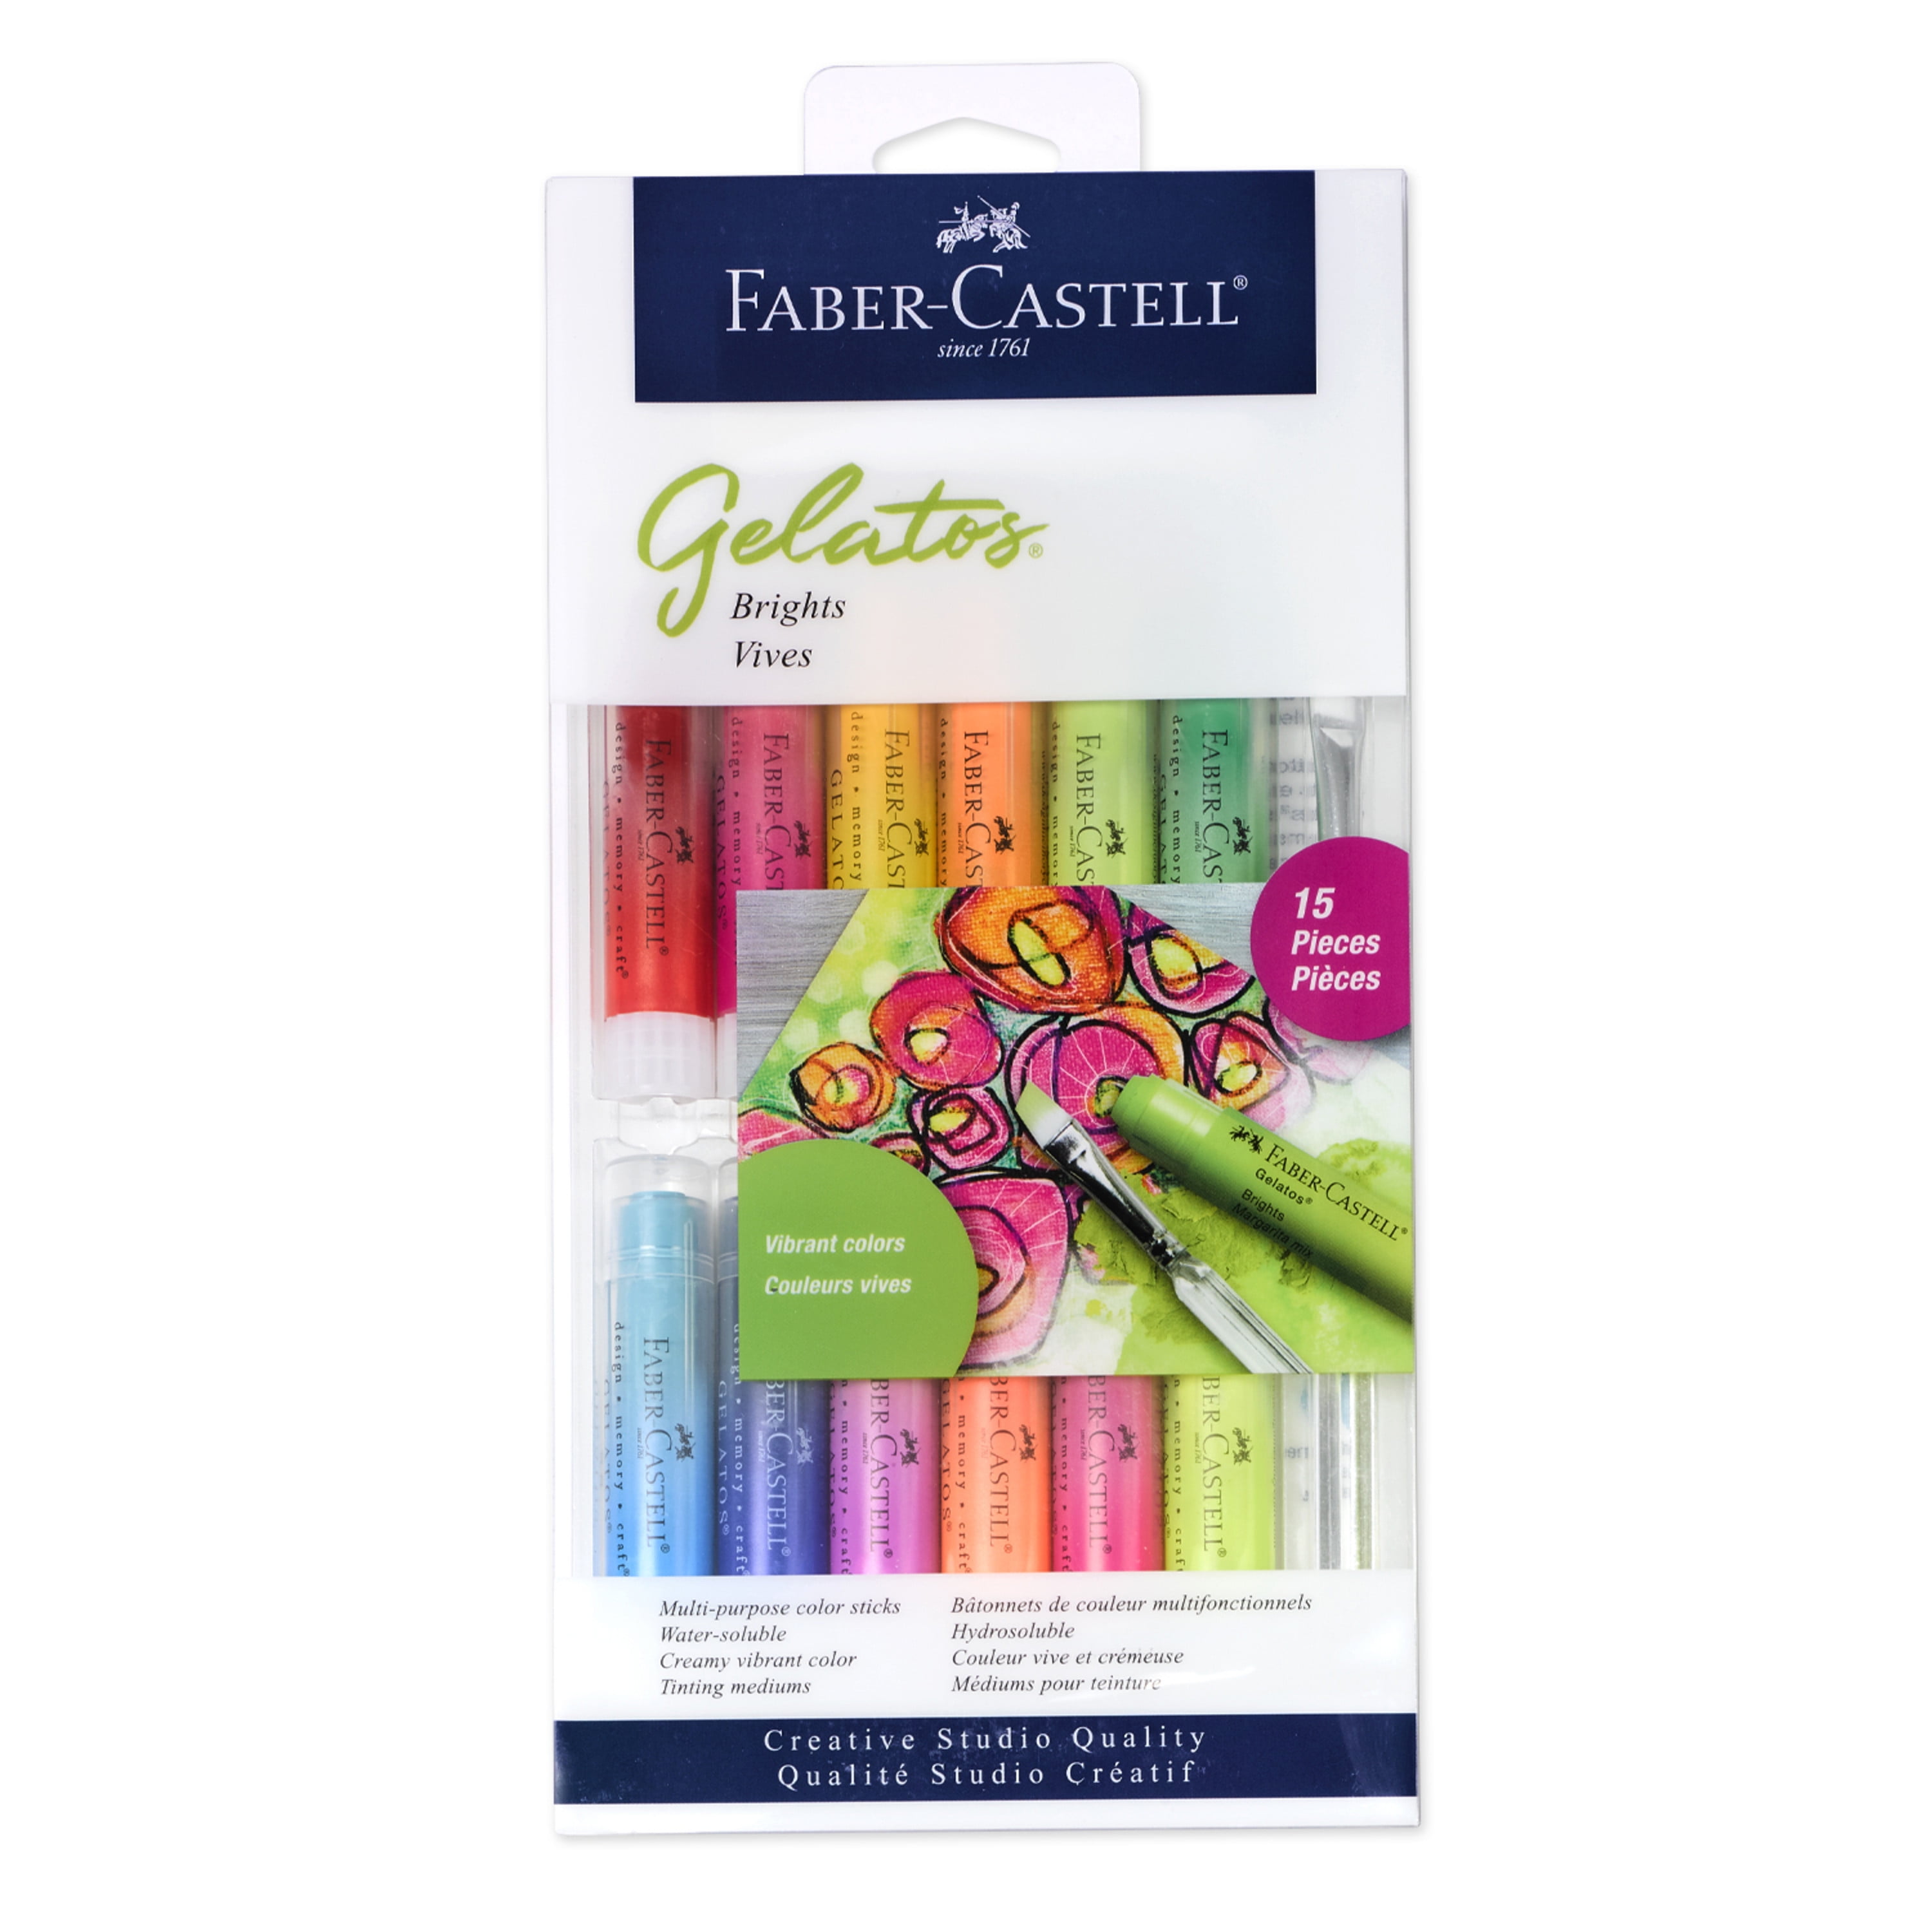 Faber-Castell Gel Stick Set of 12 with free Brush - Set of 12, Assorted